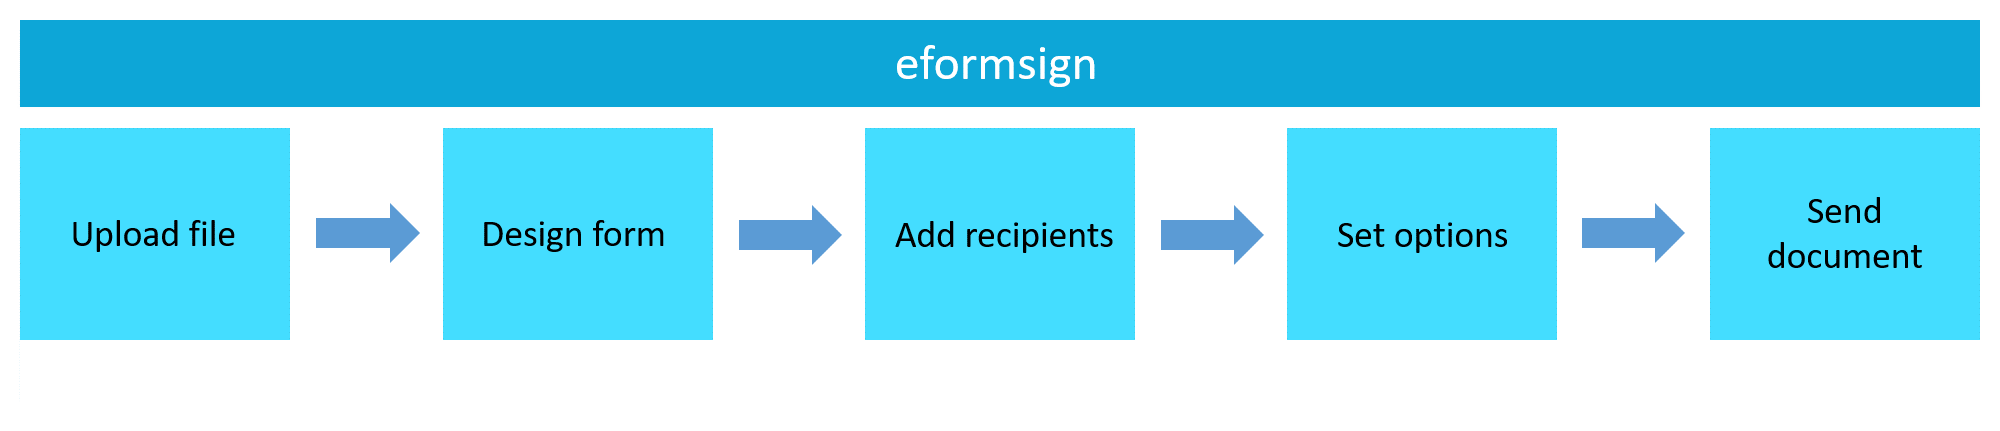 Usage Flow of eformsign using New from my file